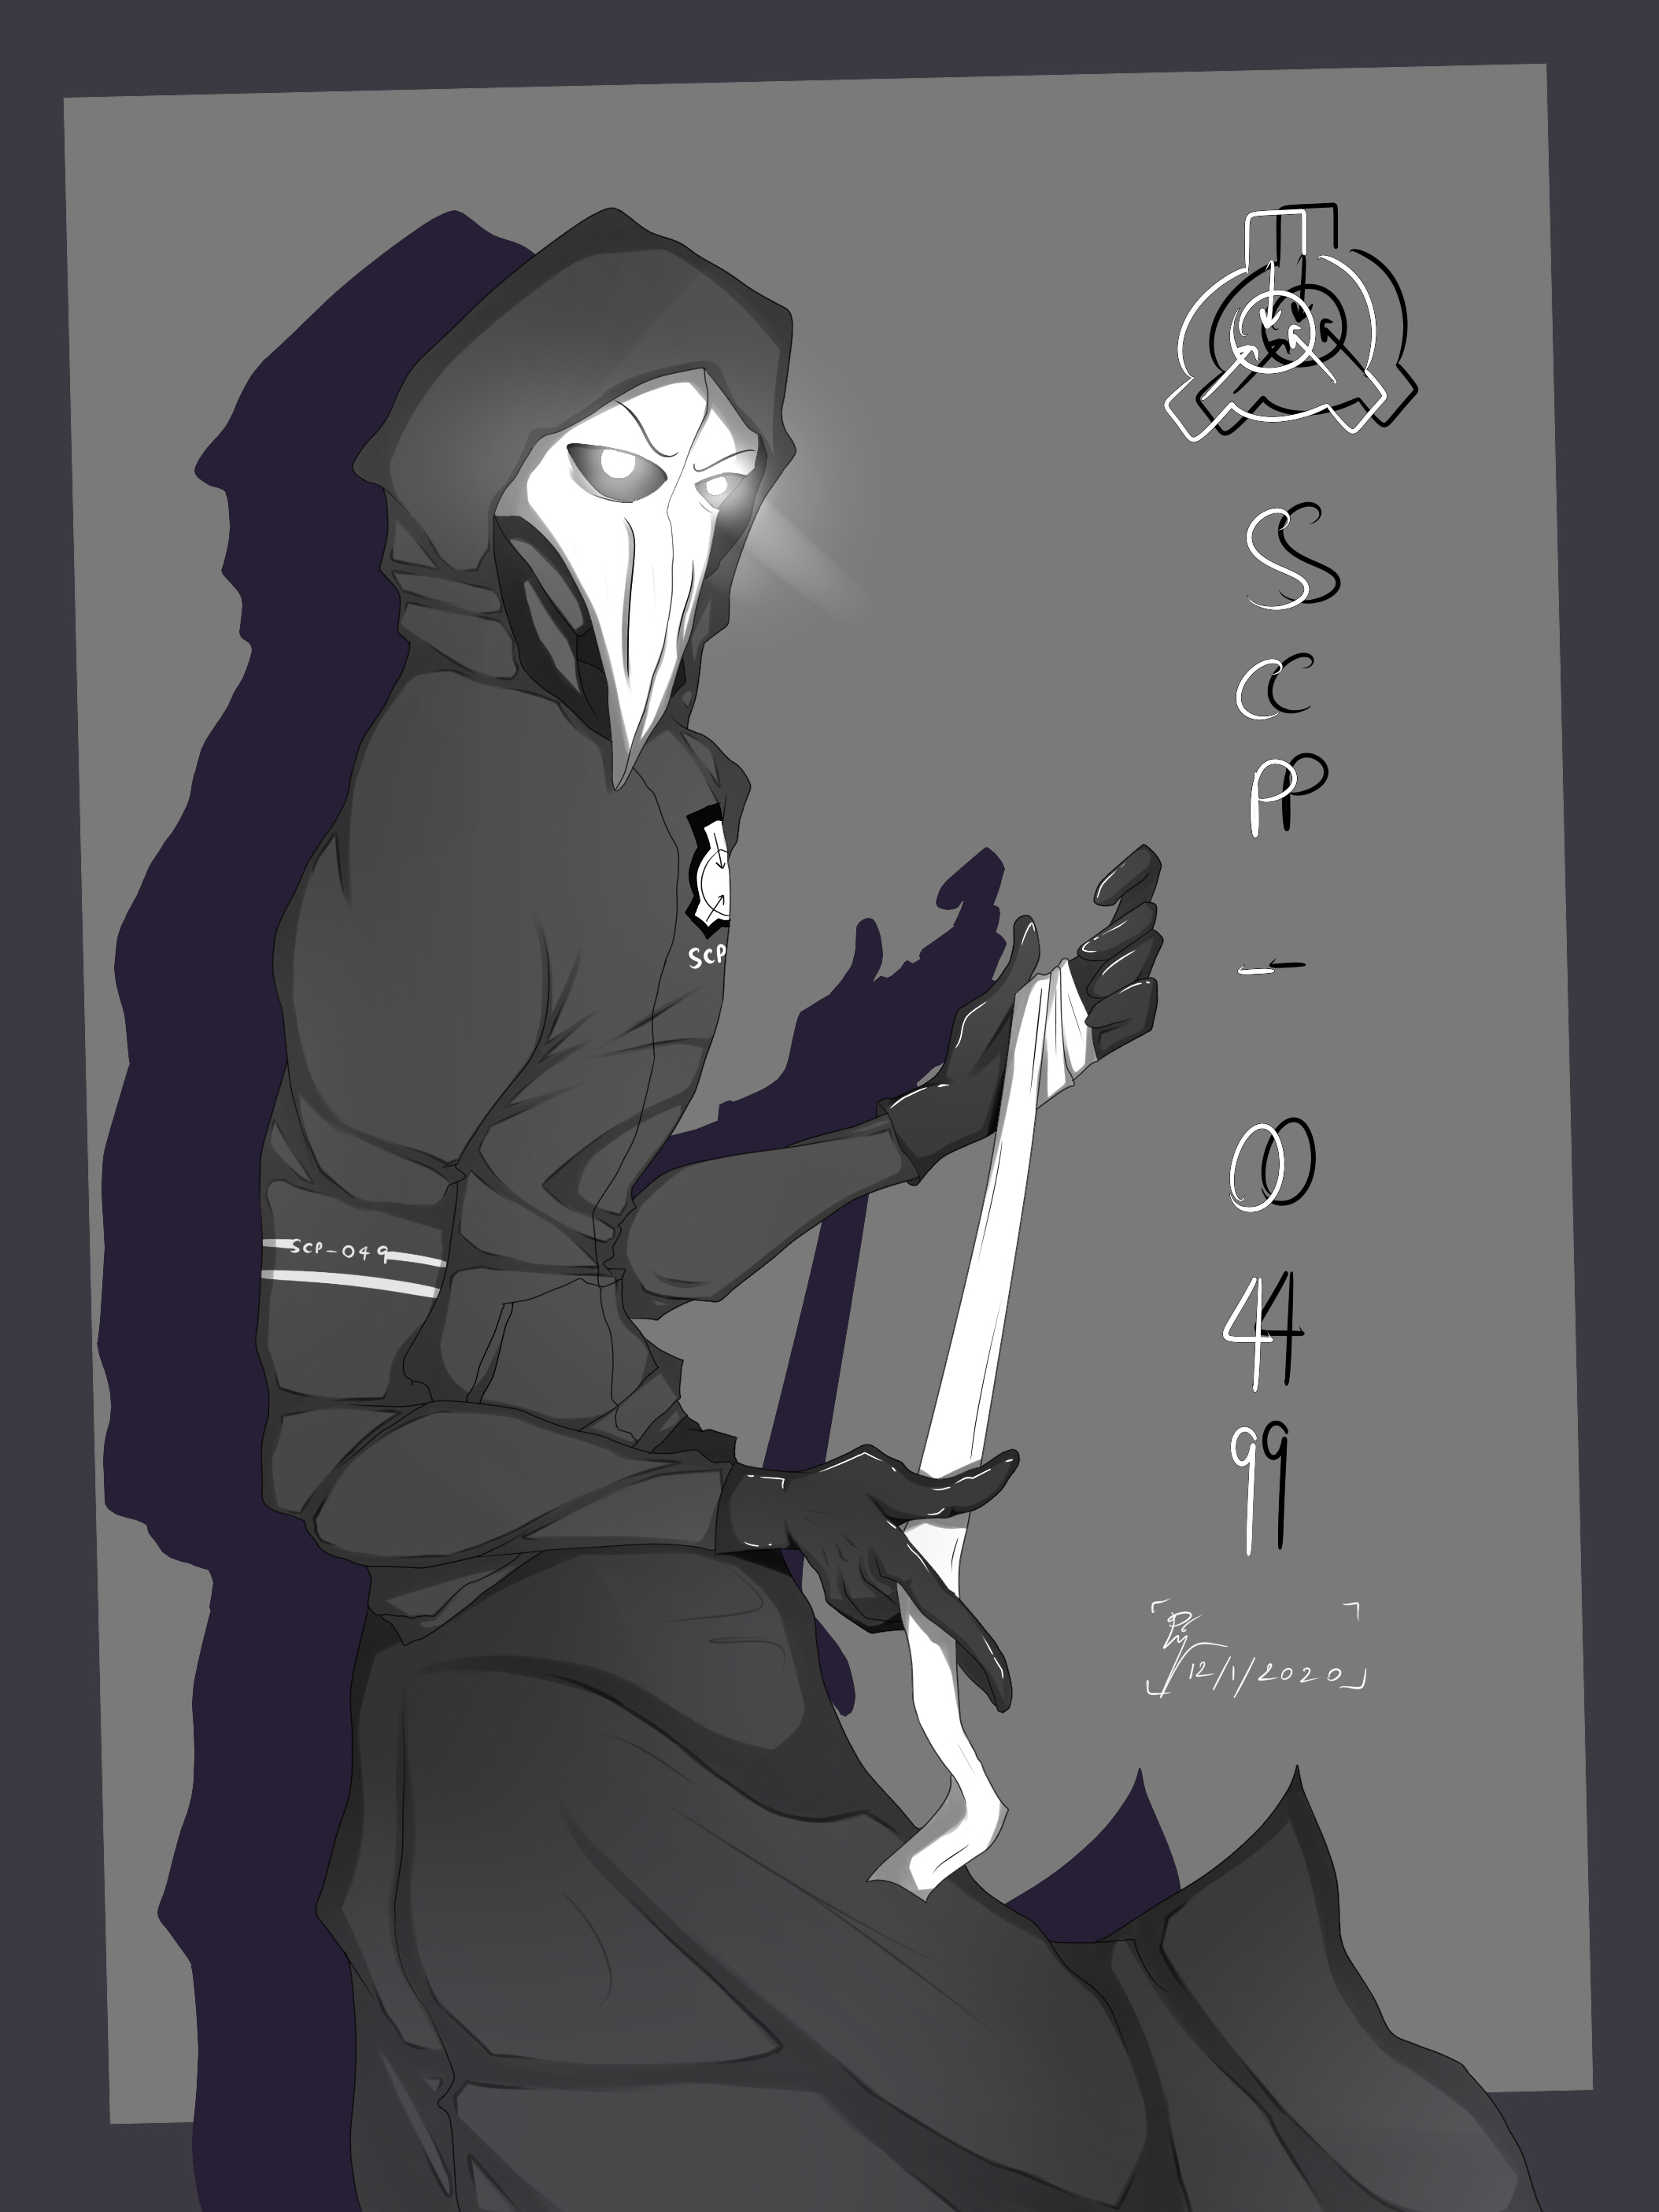 Before the Foundation exist (SCP-049) (AI) by bonnieta123 on DeviantArt